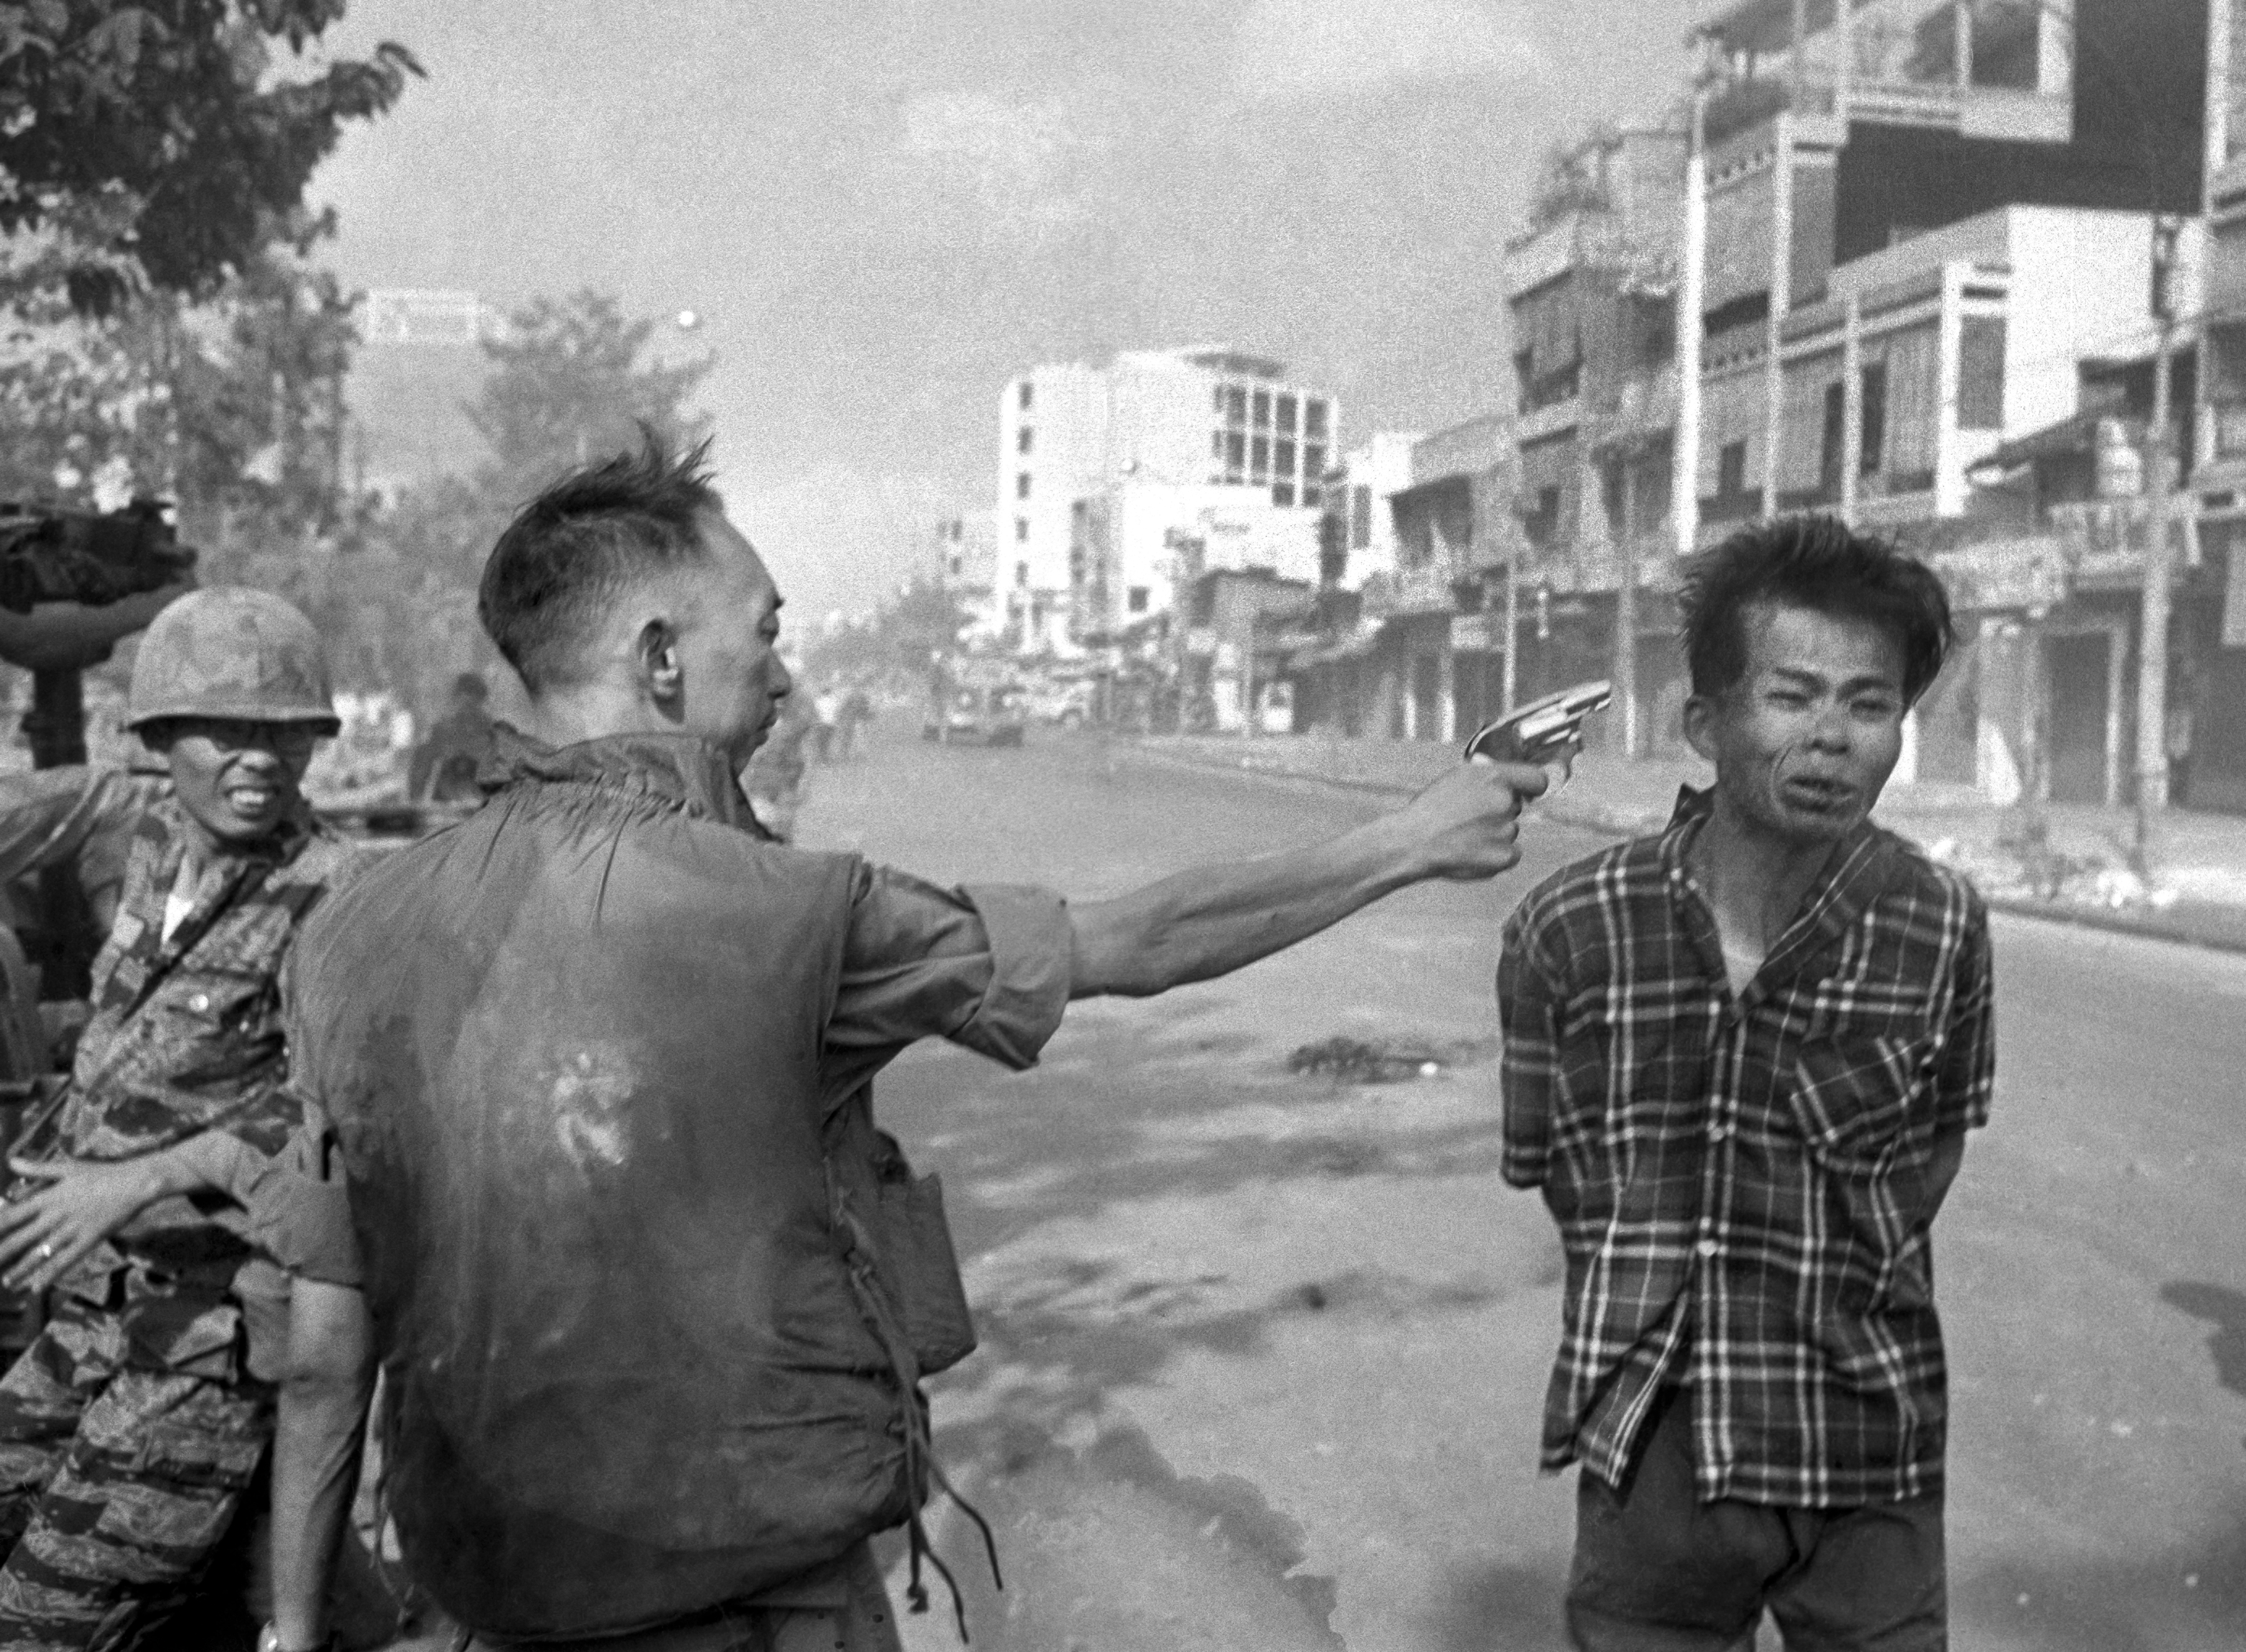 South Vietnamese Gen. Nguyen Ngoc Loan, chief of the national police, fires his pistol into the head of suspected Viet Cong officer Nguyen Van Lem (also known as Bay Lop) on a Saigon street Feb. 1, 1968, early in the Tet Offensive. The general said Nguyen Van Lem was responsible for numerous Vietnamese and American deaths. (AP Photo/Eddie Adams)